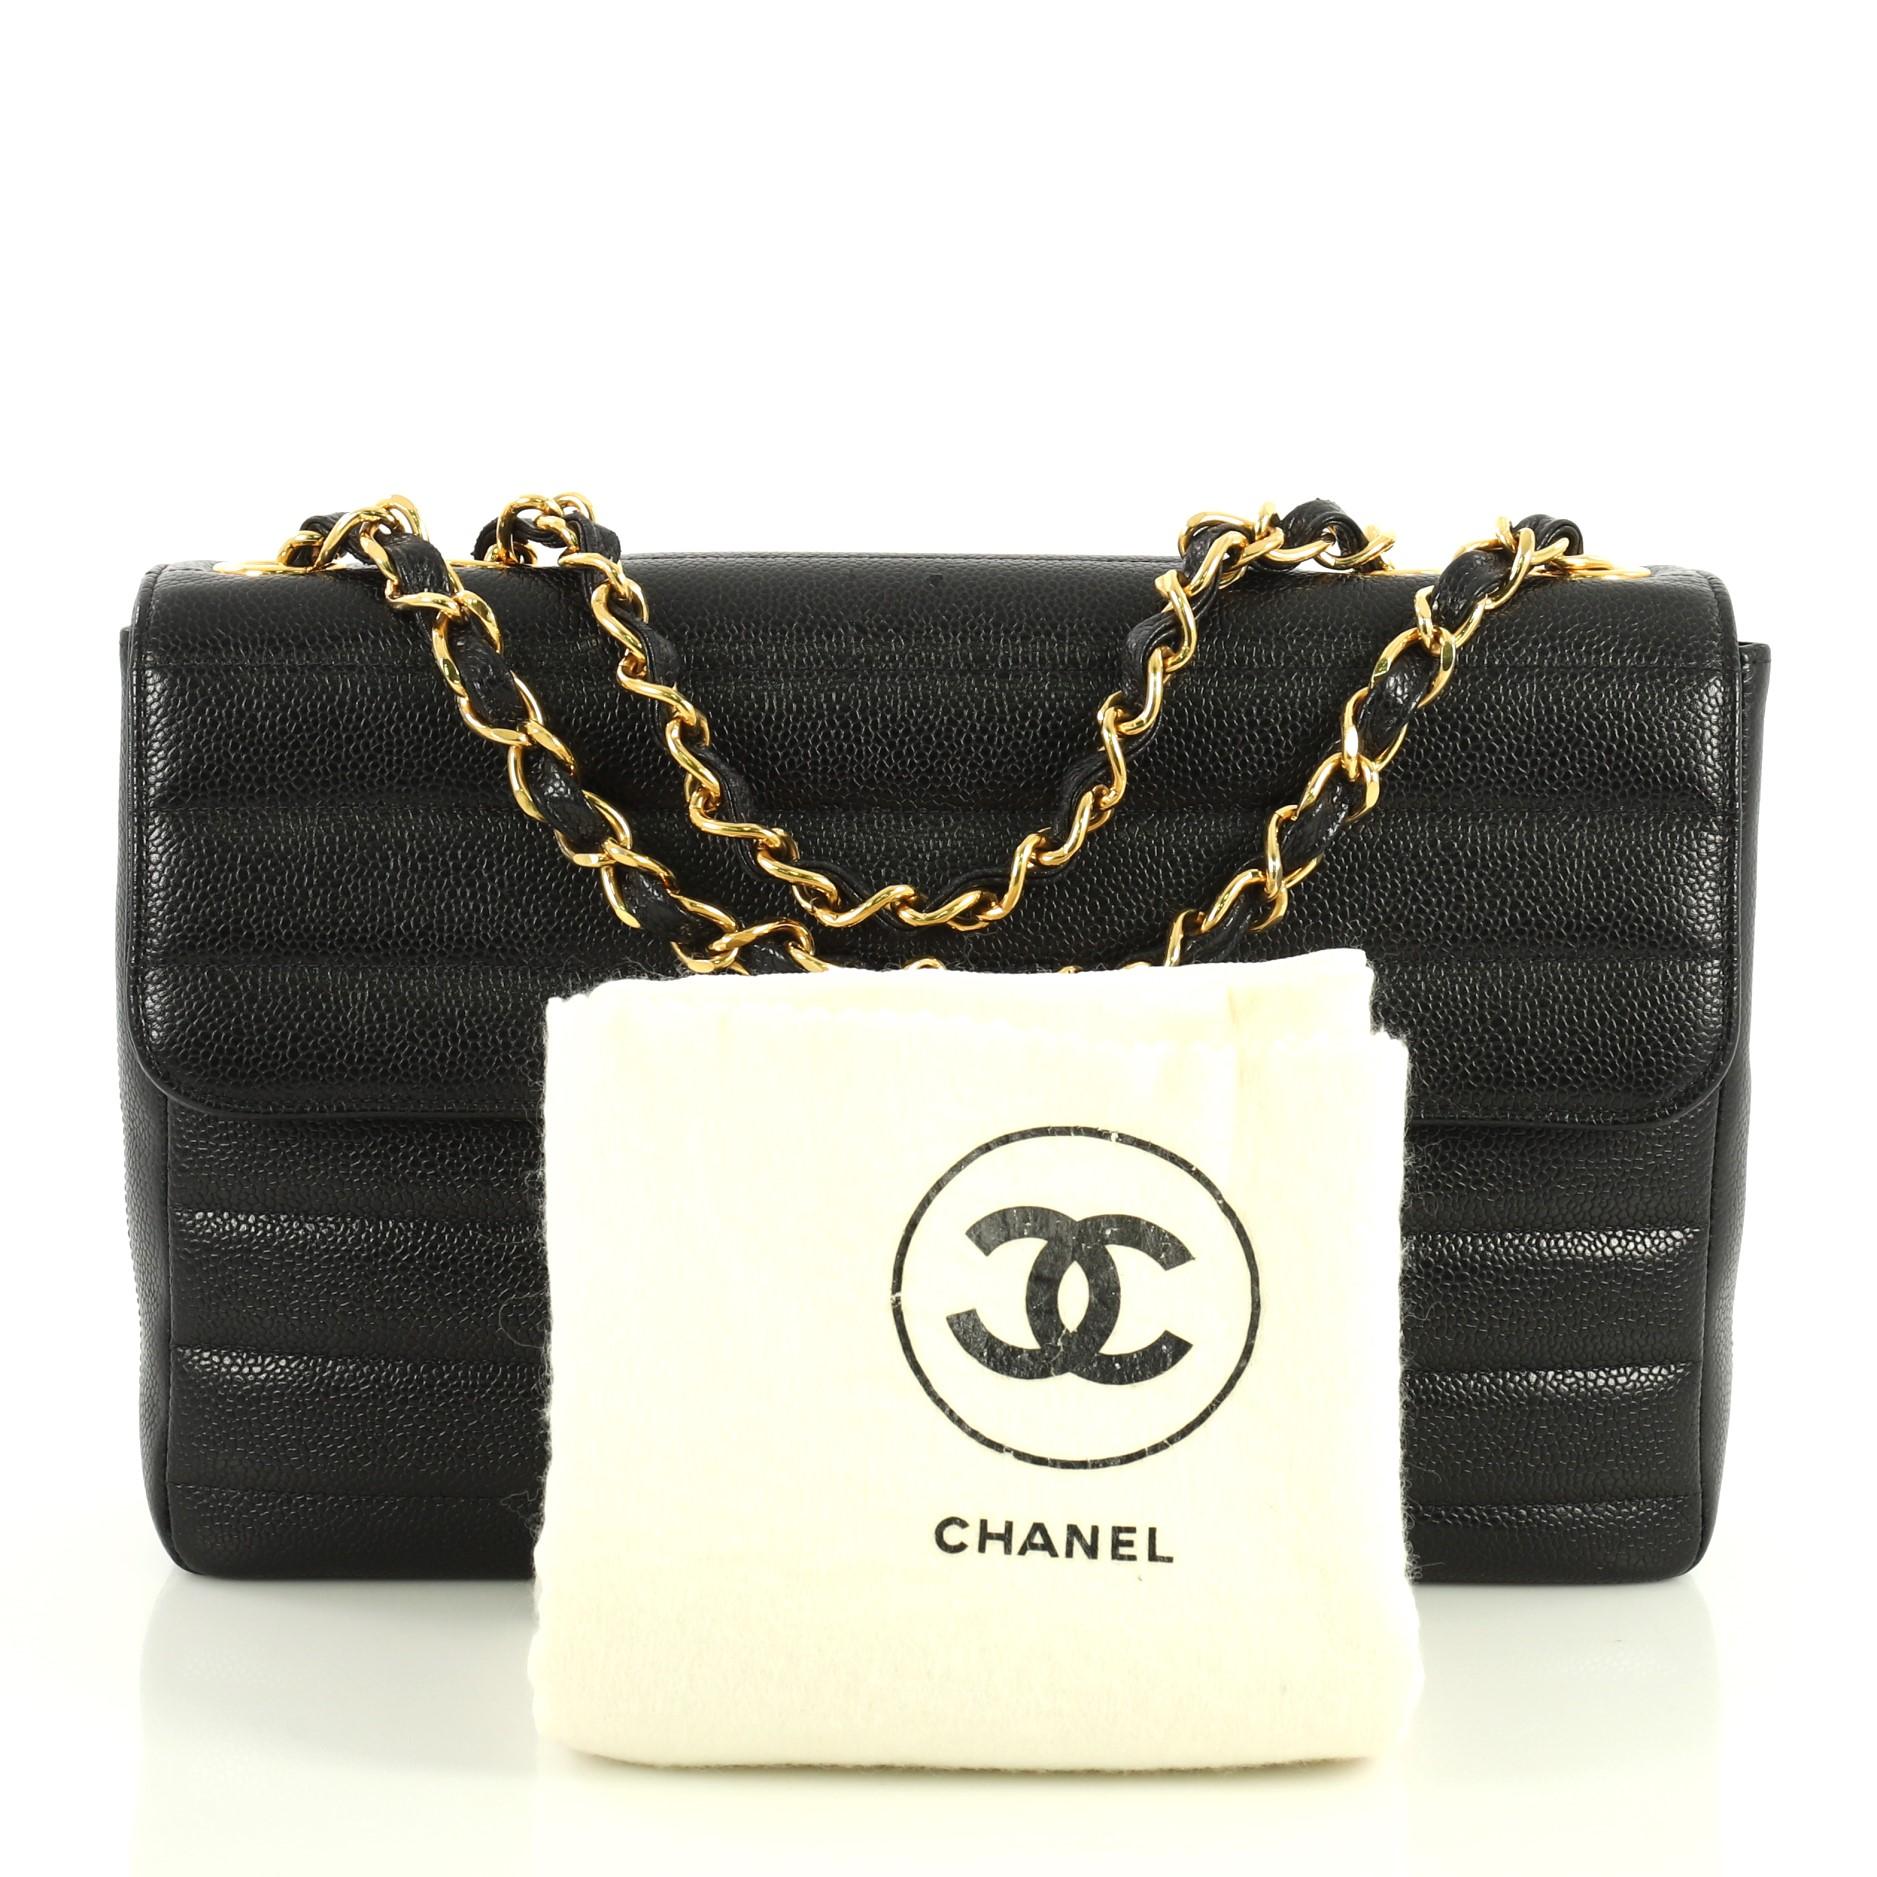 This Chanel Classic Flap Bag Horizontal Quilted Caviar Jumbo, crafted from black horizontal quilted caviar leather, features woven-in leather chain link strap and gold-tone hardware. Its CC turn-lock closure opens to a black leather interior with